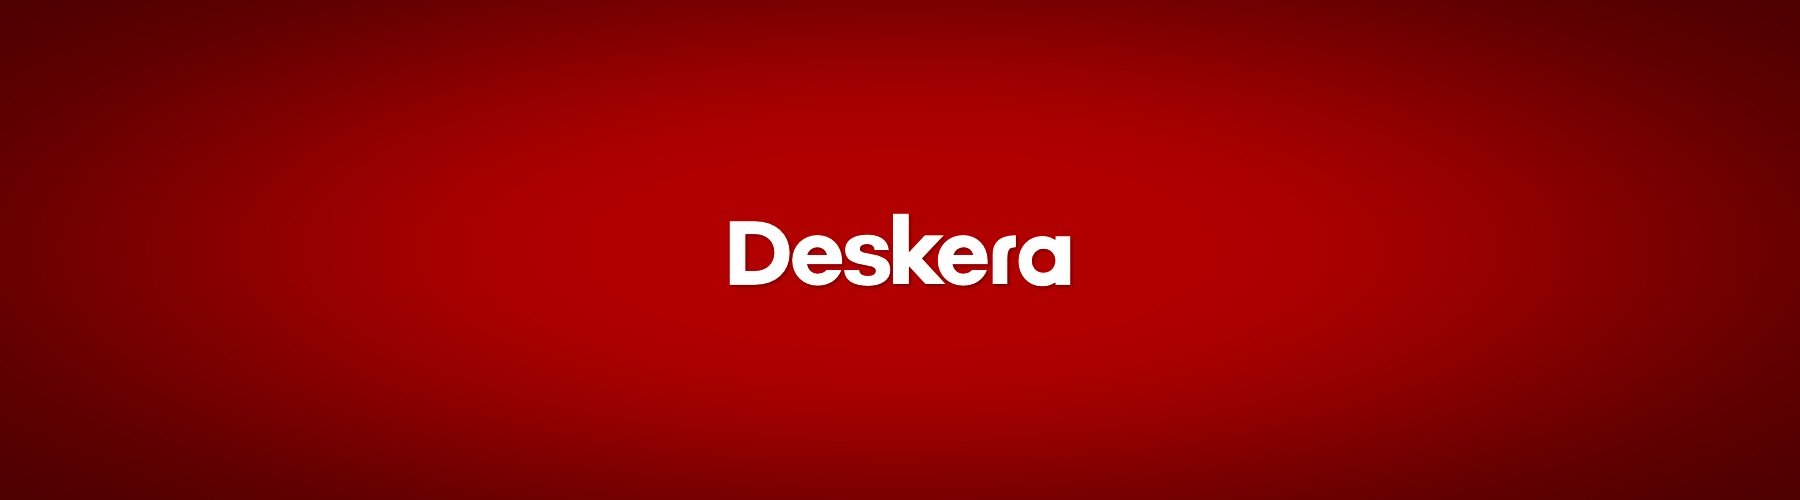 Deskera Partner Portal - Creating a Customized Sign-up page